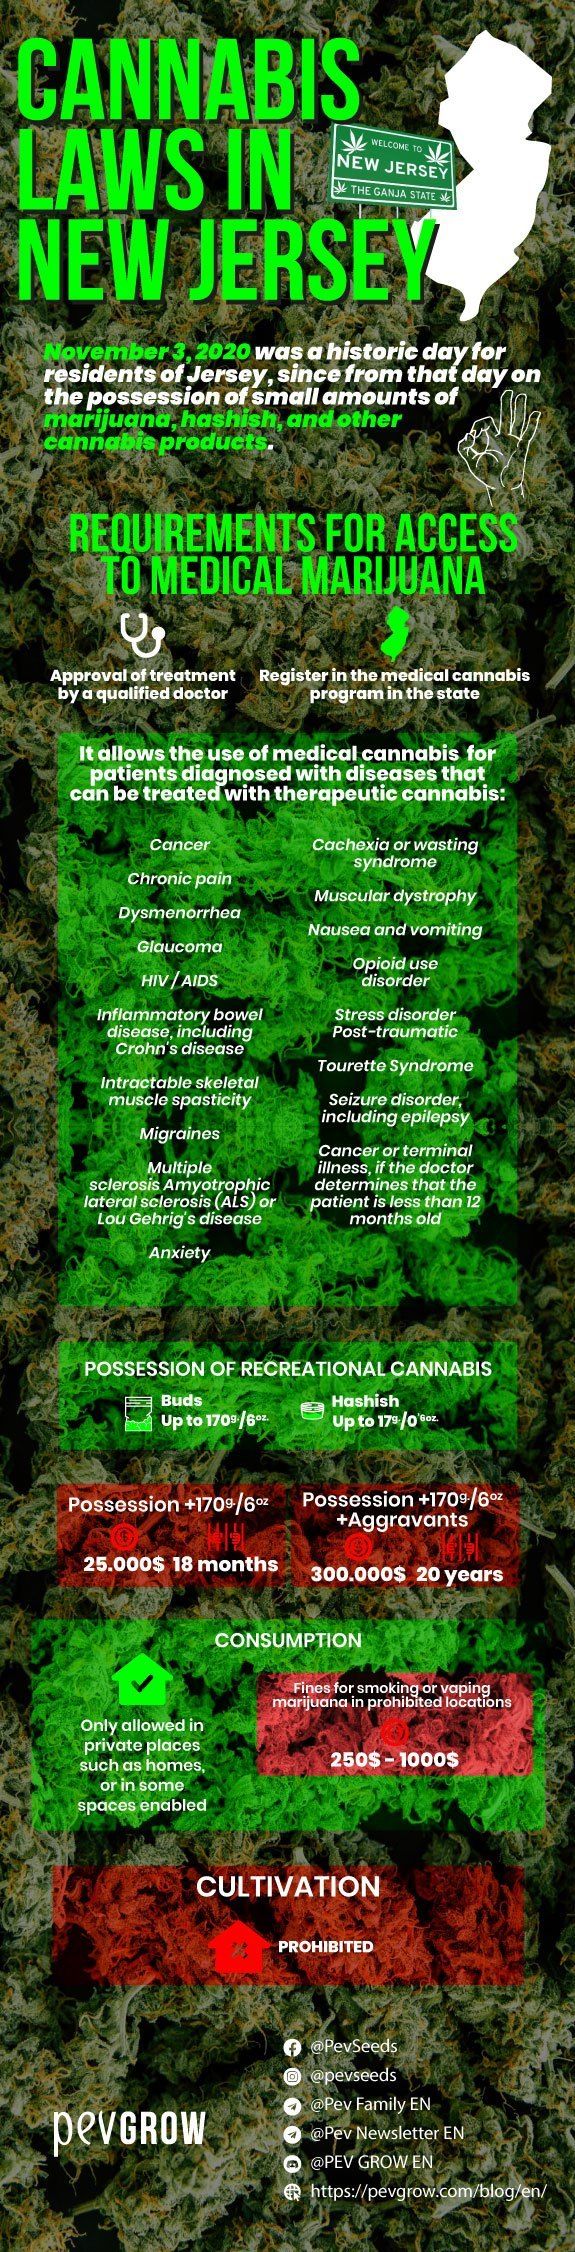 New Jersey's cannabis laws, penalties and permitted uses